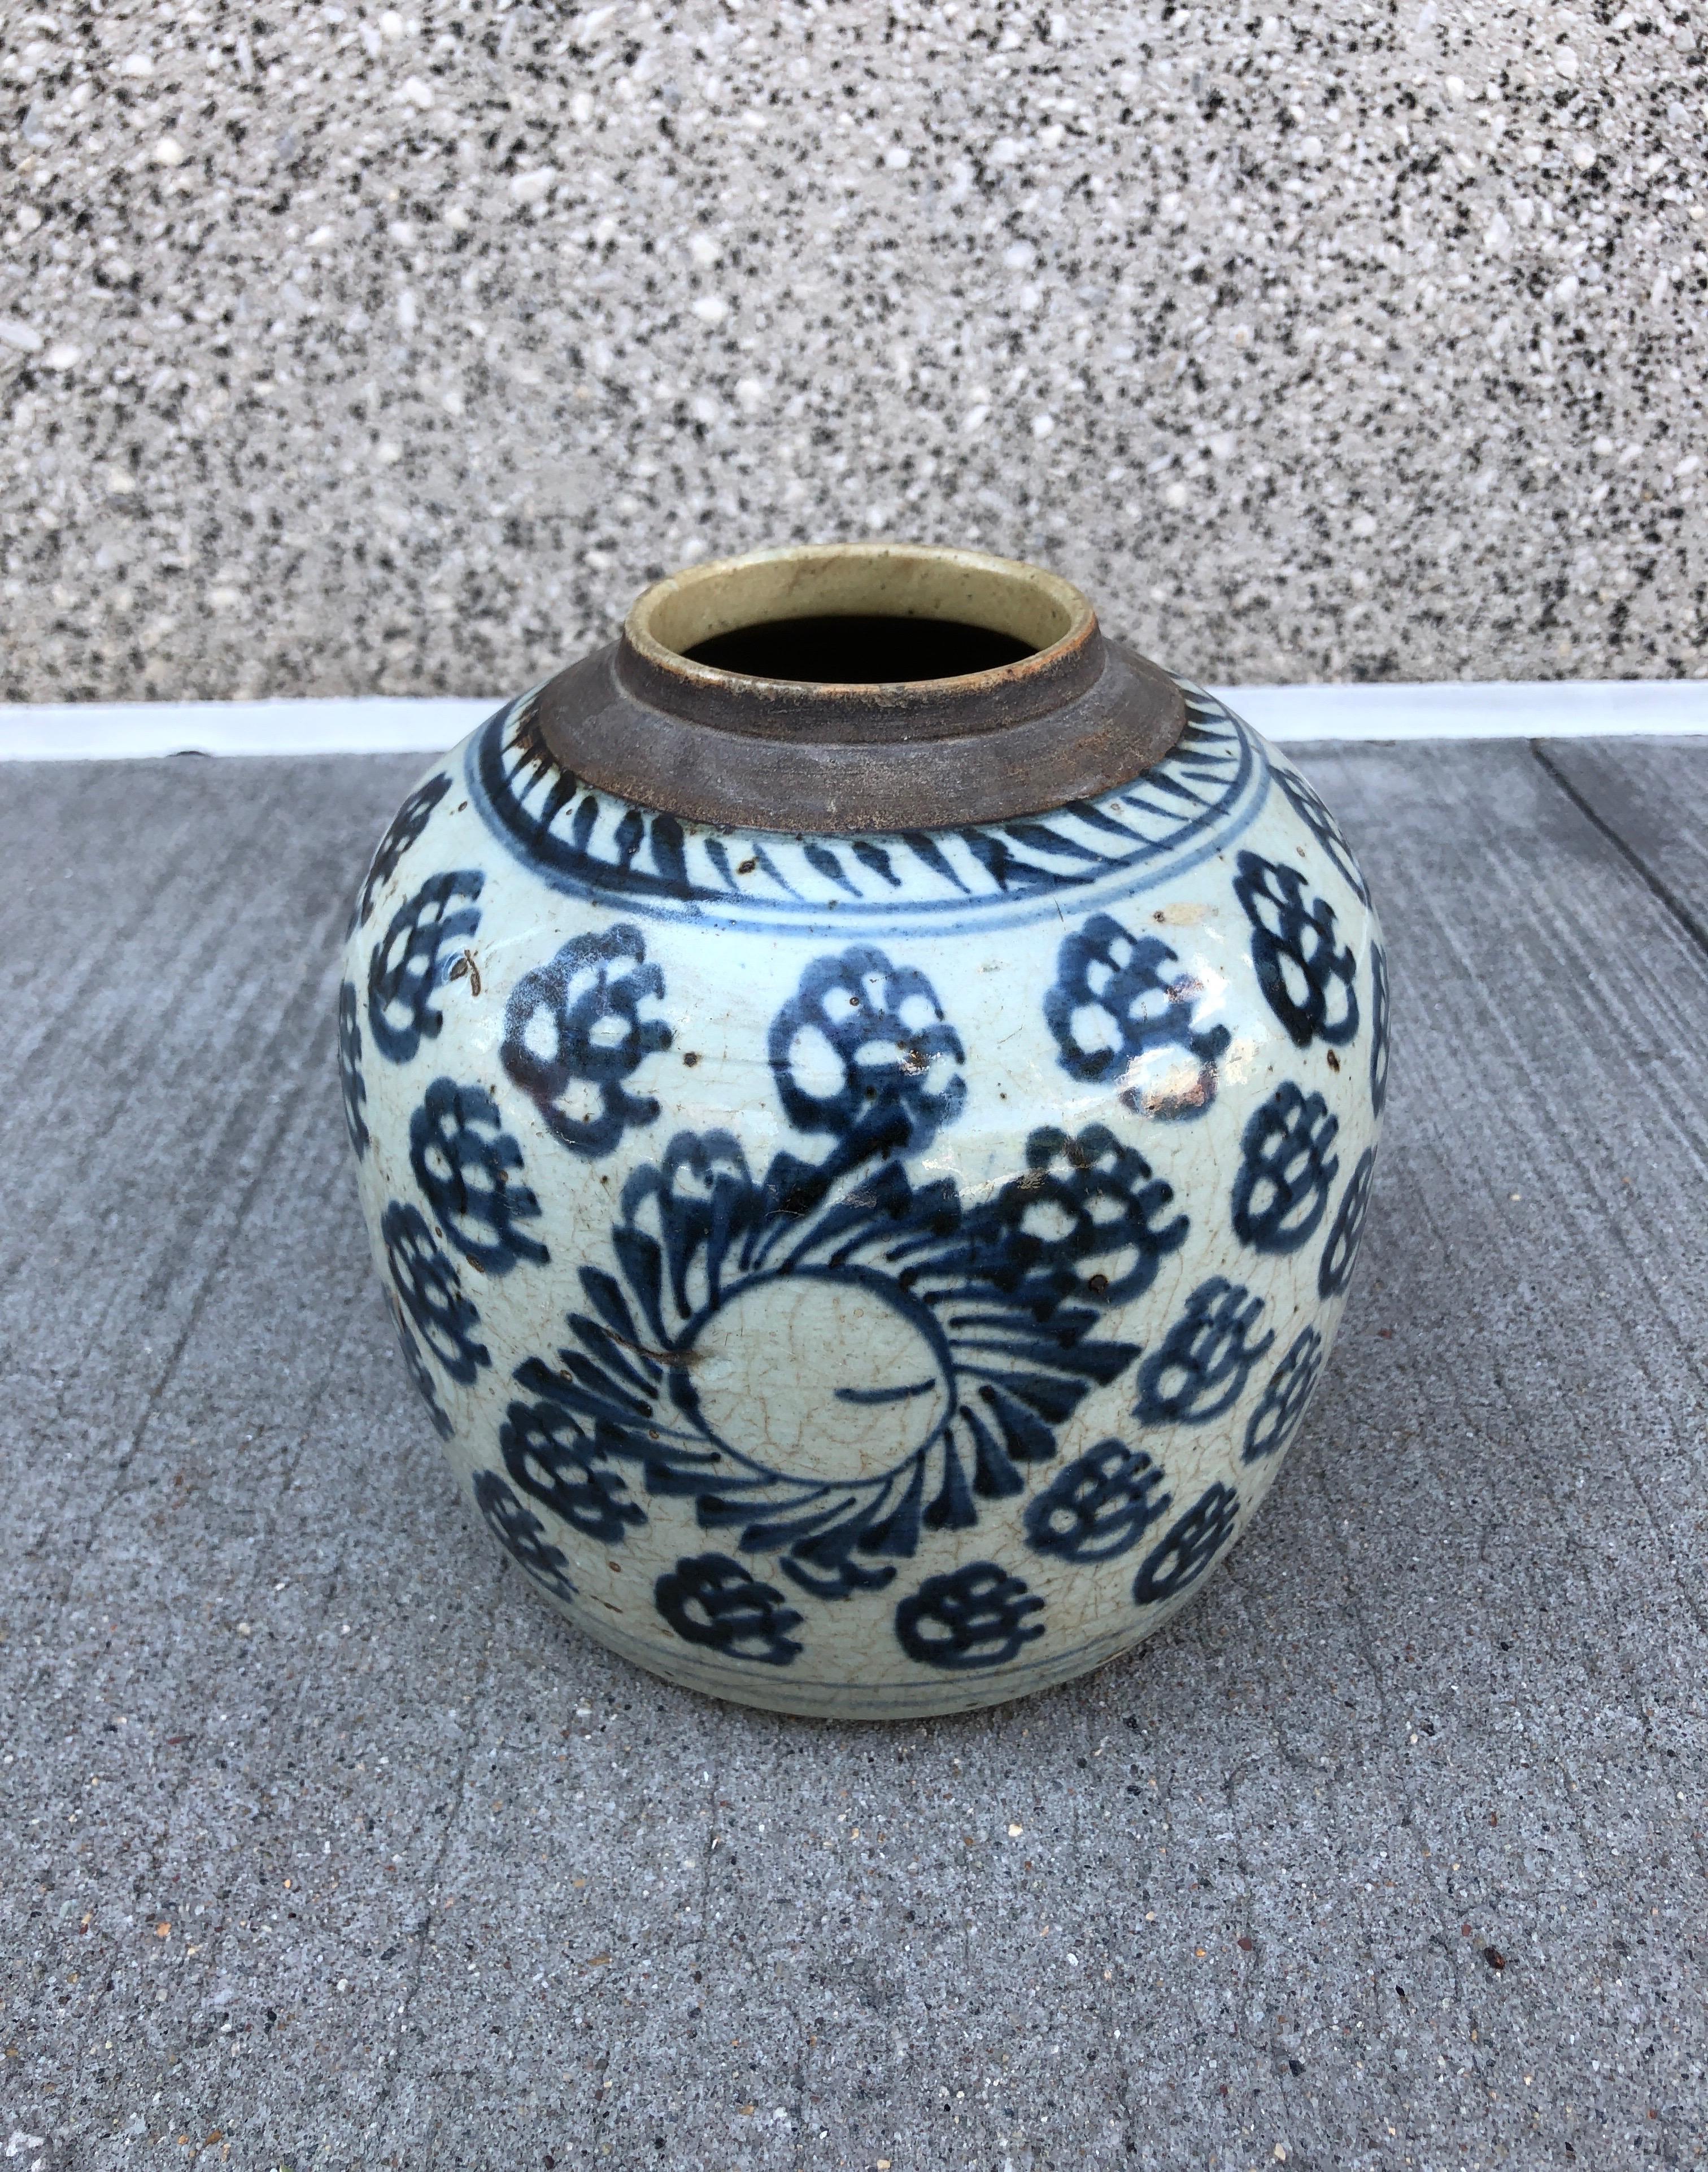 A classic antique blue and white 19th Century porcelain jar, beautifully painted and perfectly formed. Shanxi Province, c. 1880 or earlier.